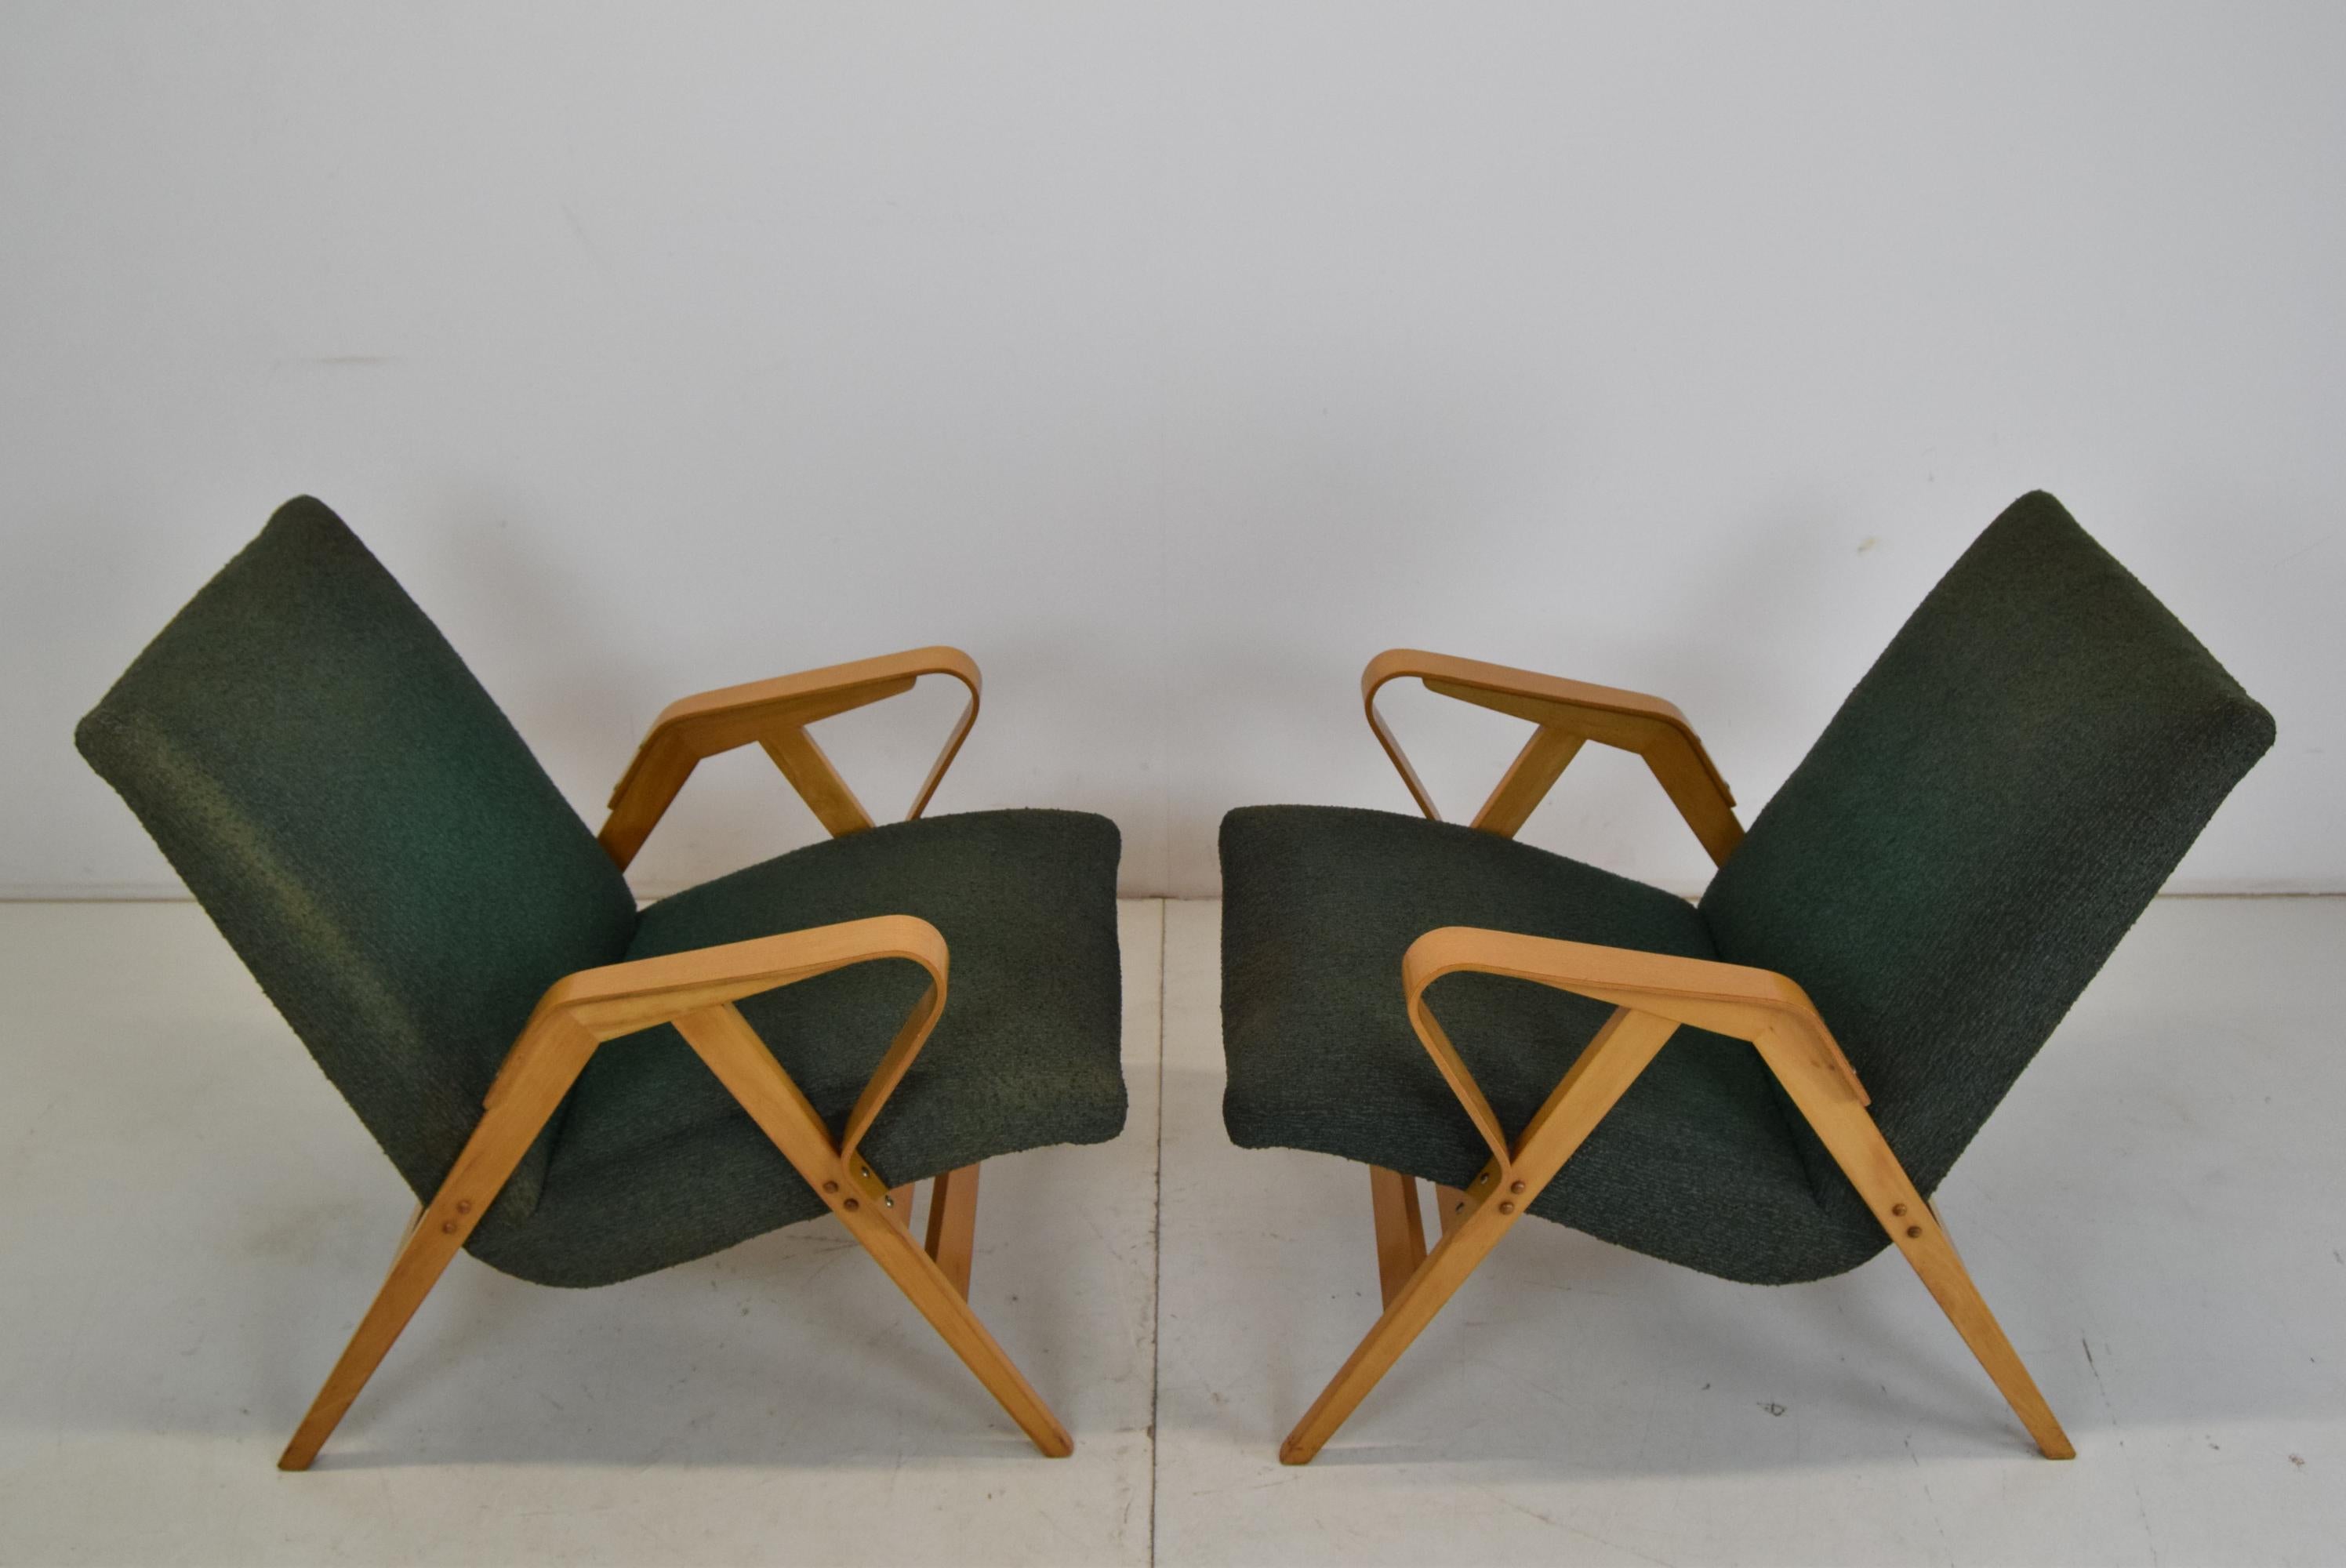 Czech Pair of mid-century Bentwood Armchairs by Frantisek Jirak for Tatra, 1960's. For Sale